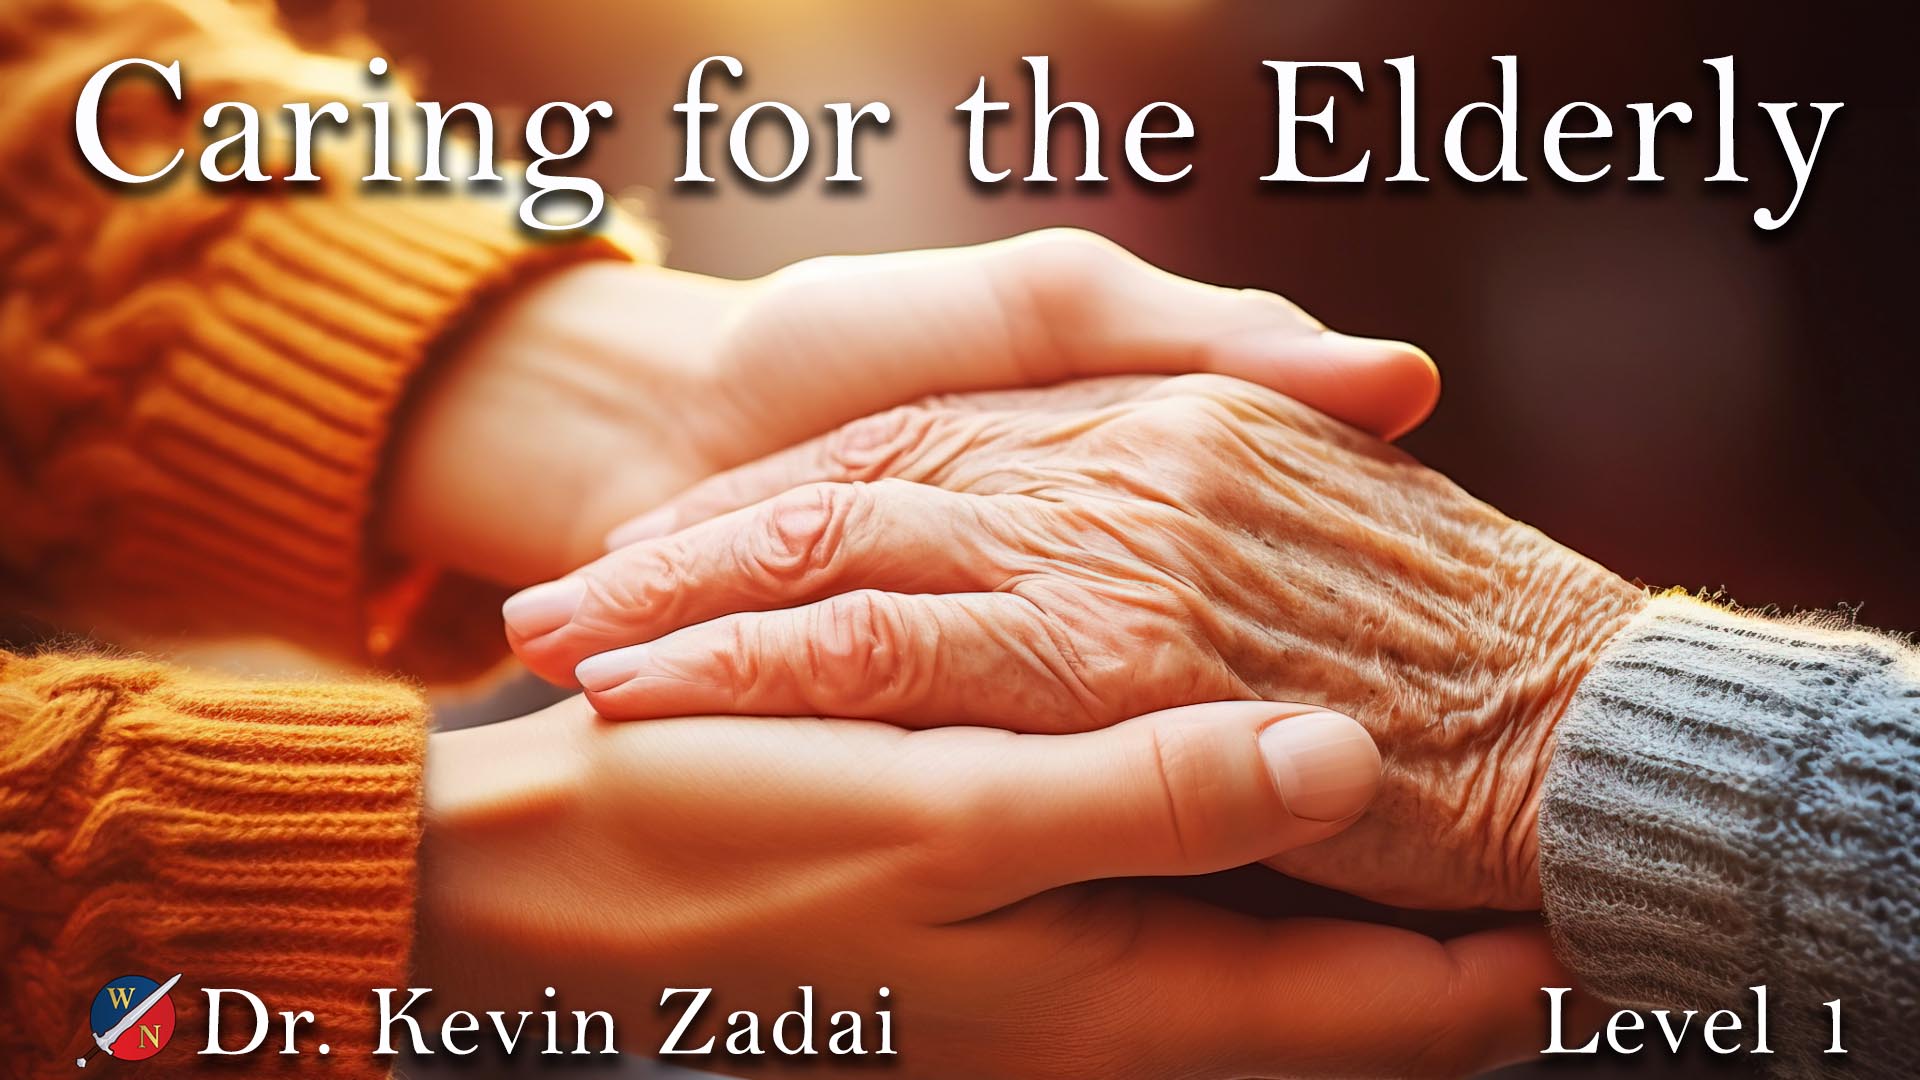 Caring for the Elderly with Dr. Kevin Zadai